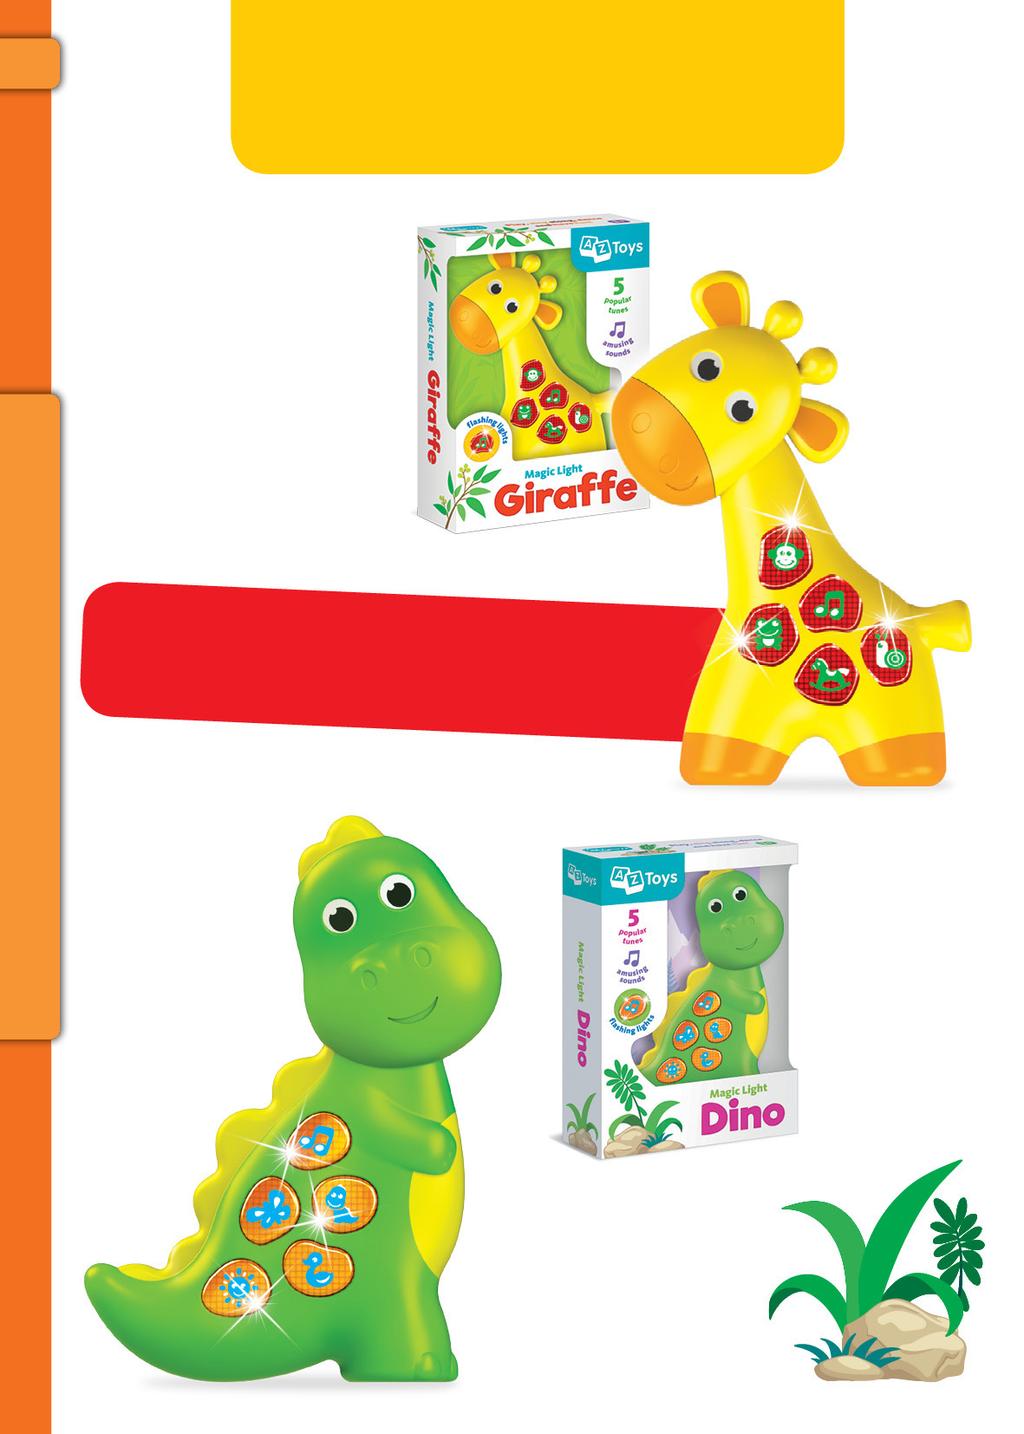 42 Magic Light GIRAFFE REF. AZT-47-A-002 1 + 5 popular tunes Amusing sounds Flashing lights MUSICAL AND ENTERTAINING TOYS The lovely Magic Light Giraffe will surely capture a child s attention!